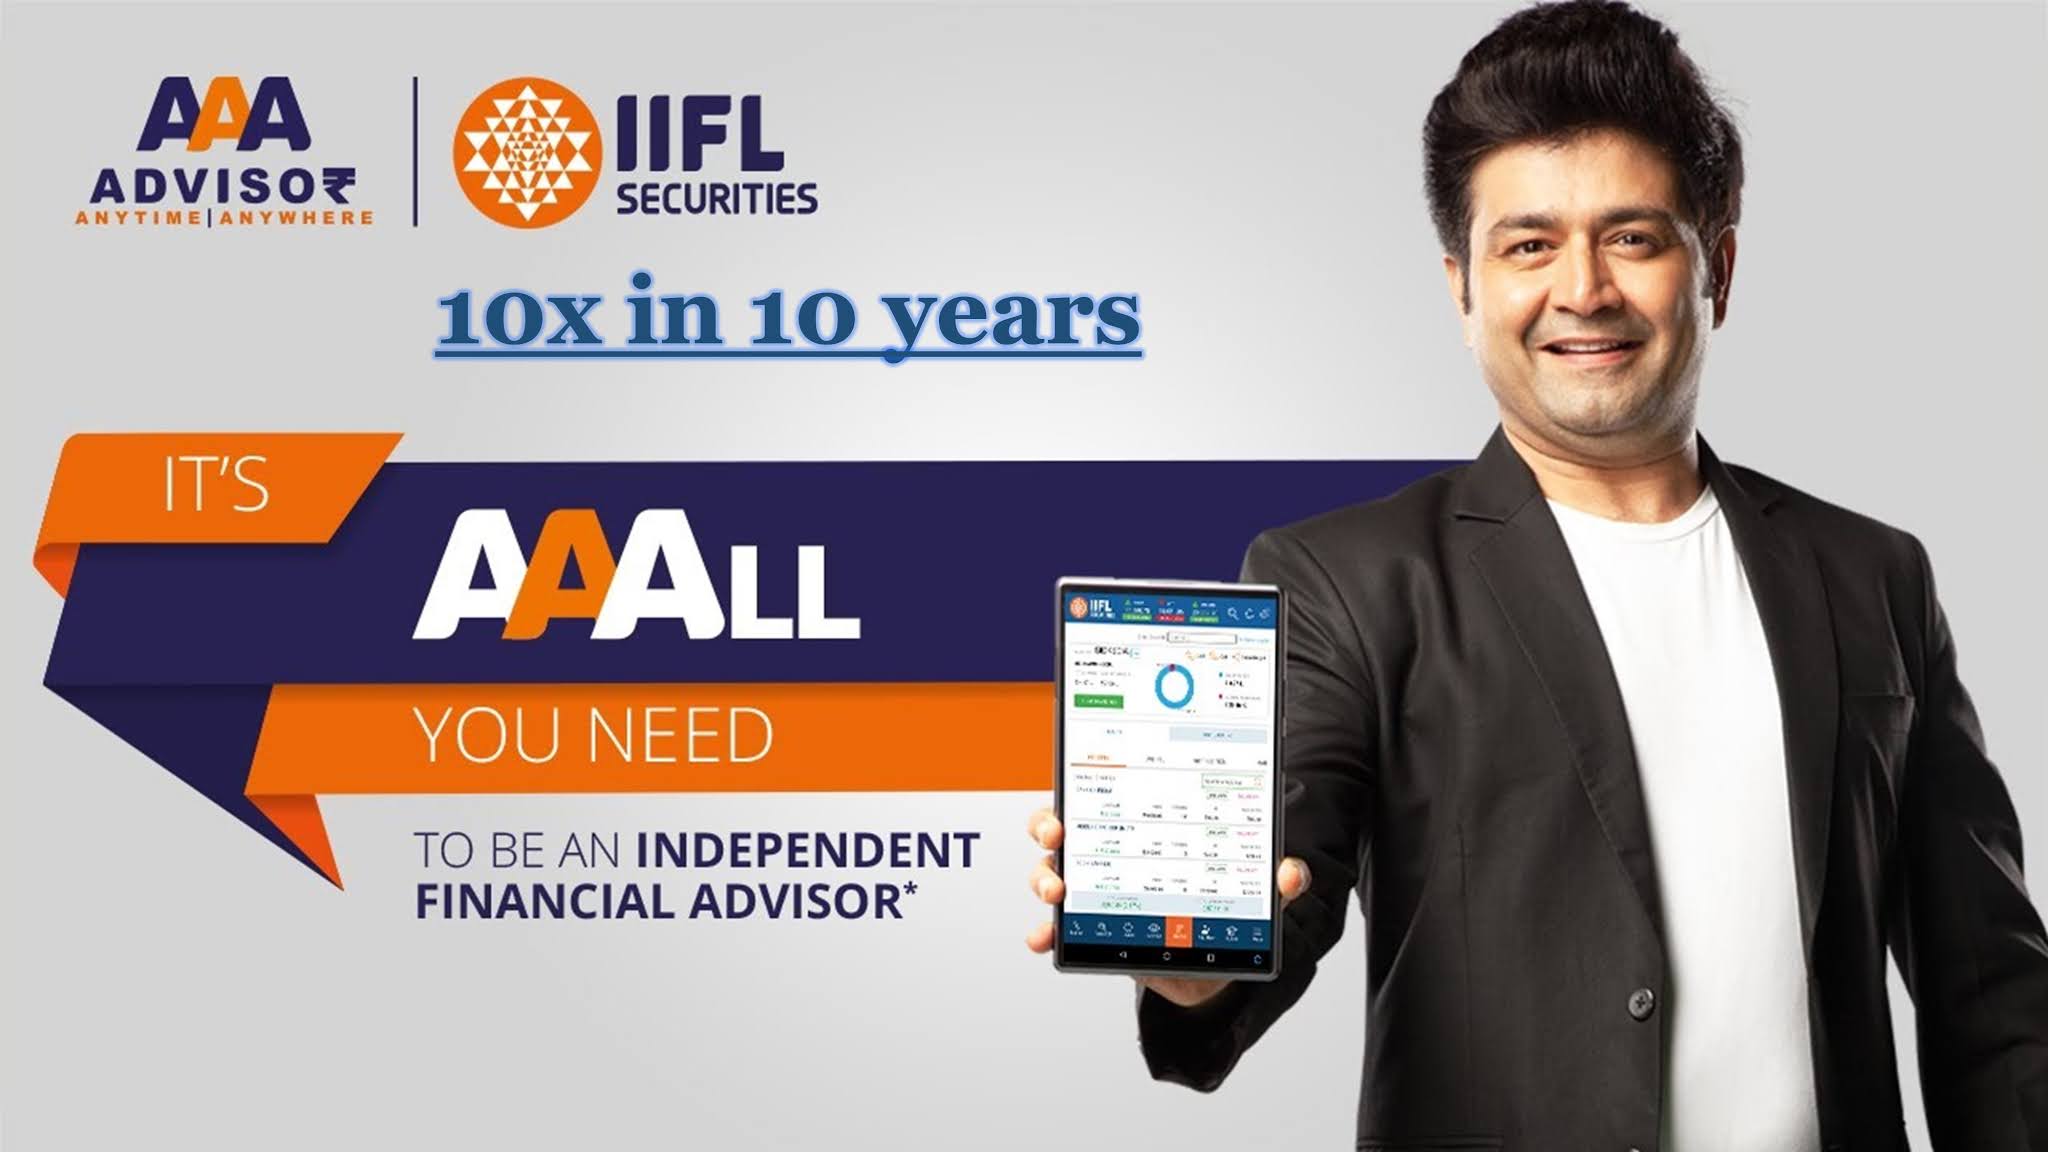 IIFL securities potential multibagger stock with 10 times return in 10 years due to its FinTech product AAA (advisory anytime anywhere)